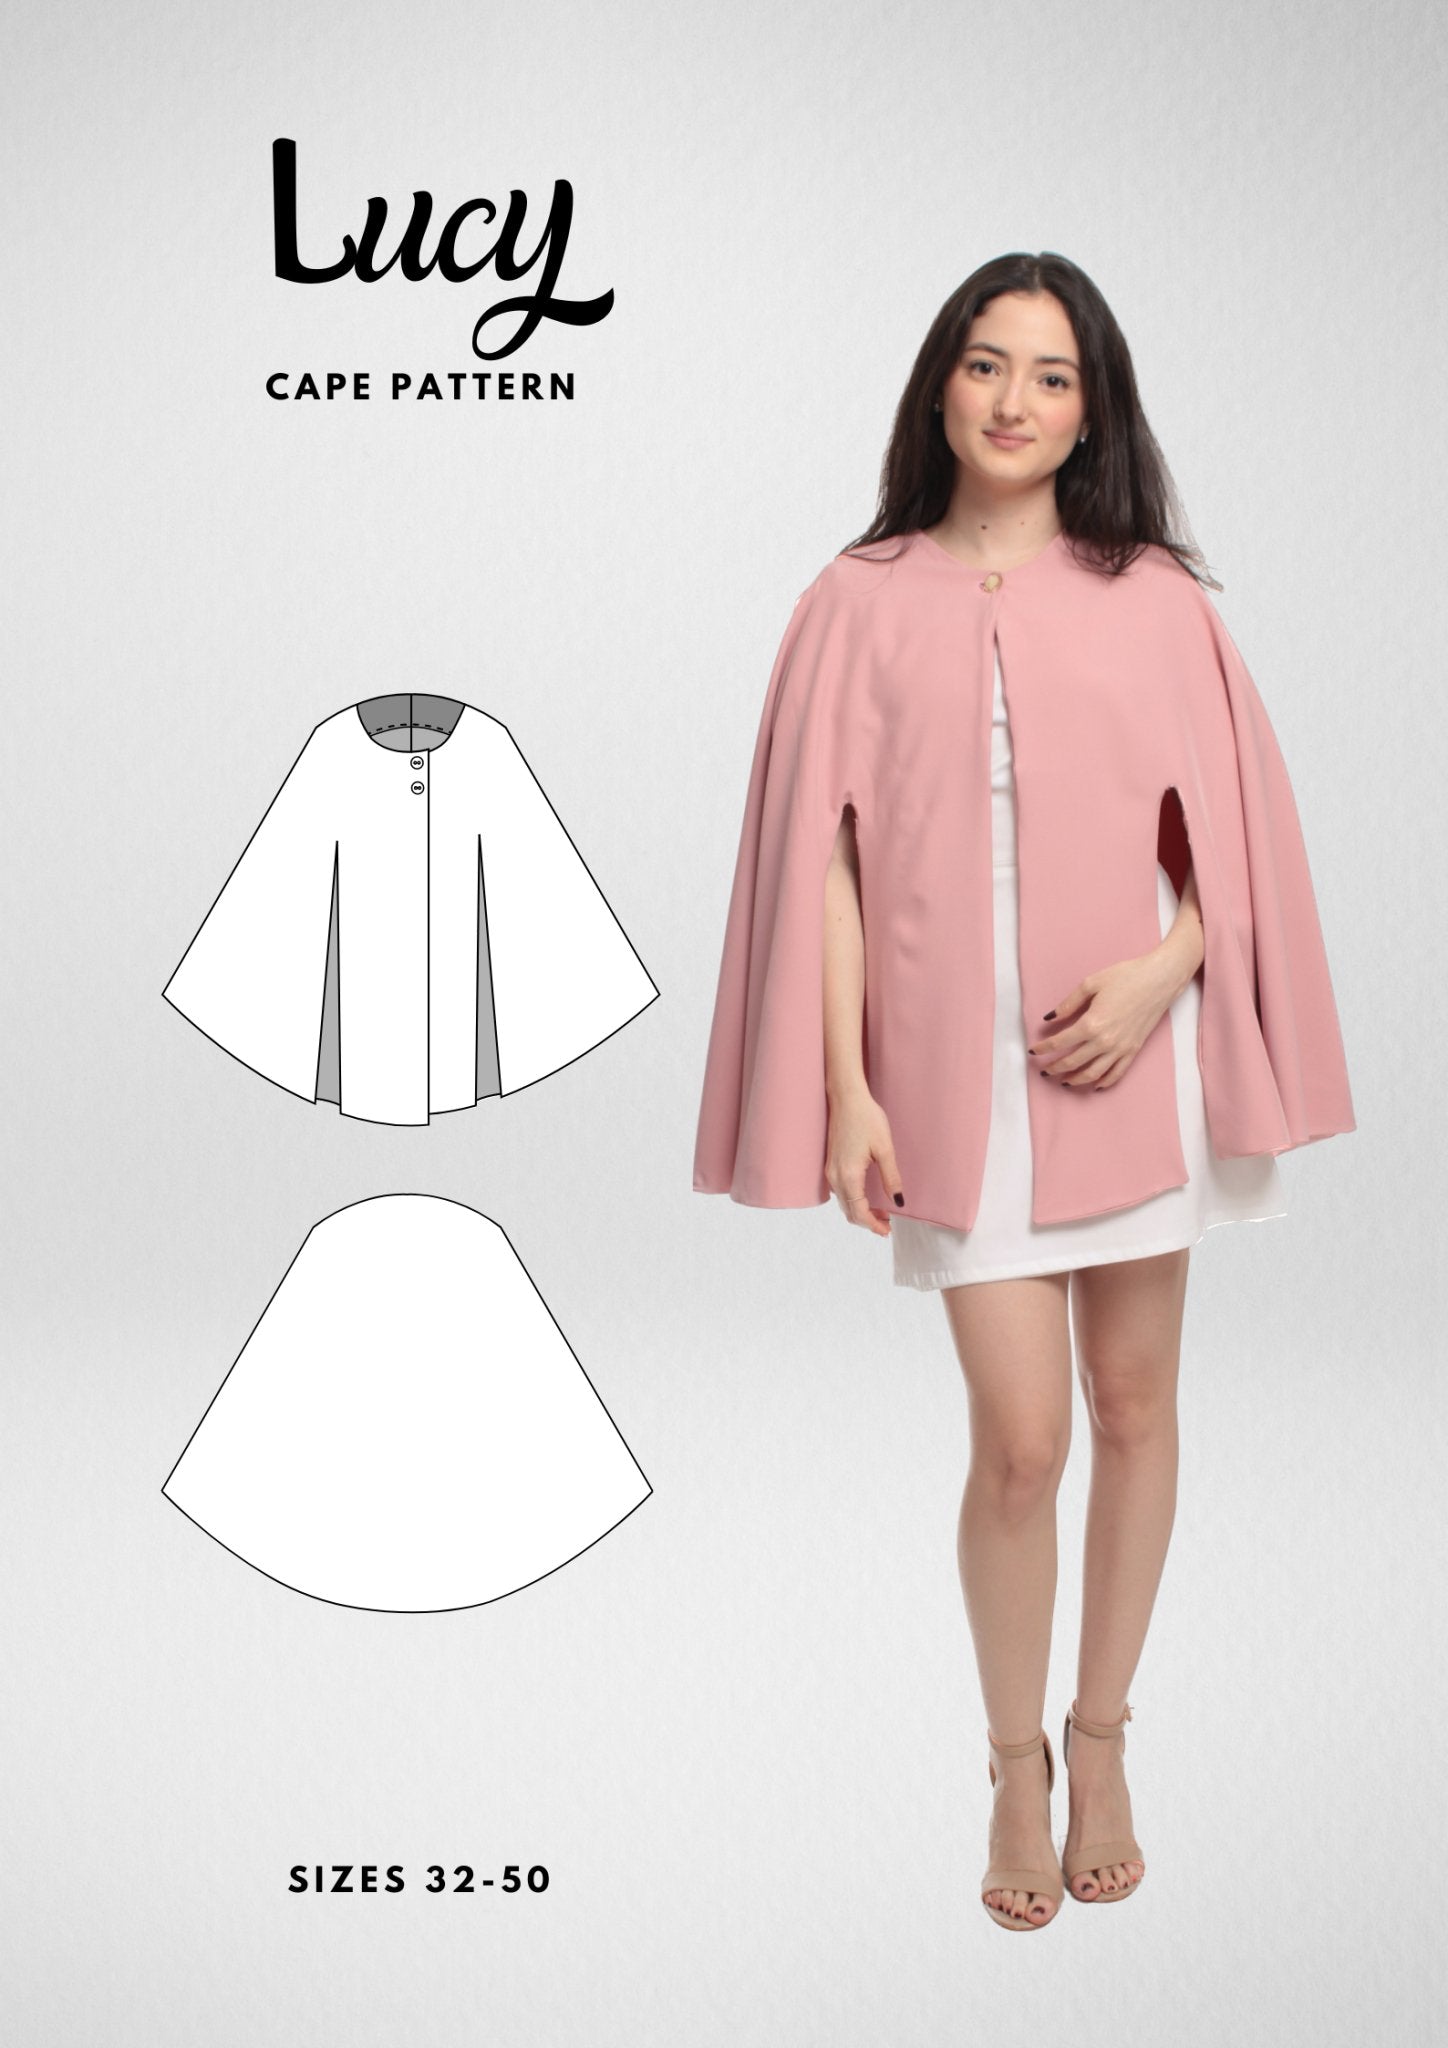 Long Elegant Cape Sewing Pattern [Lucy] - Friedlies